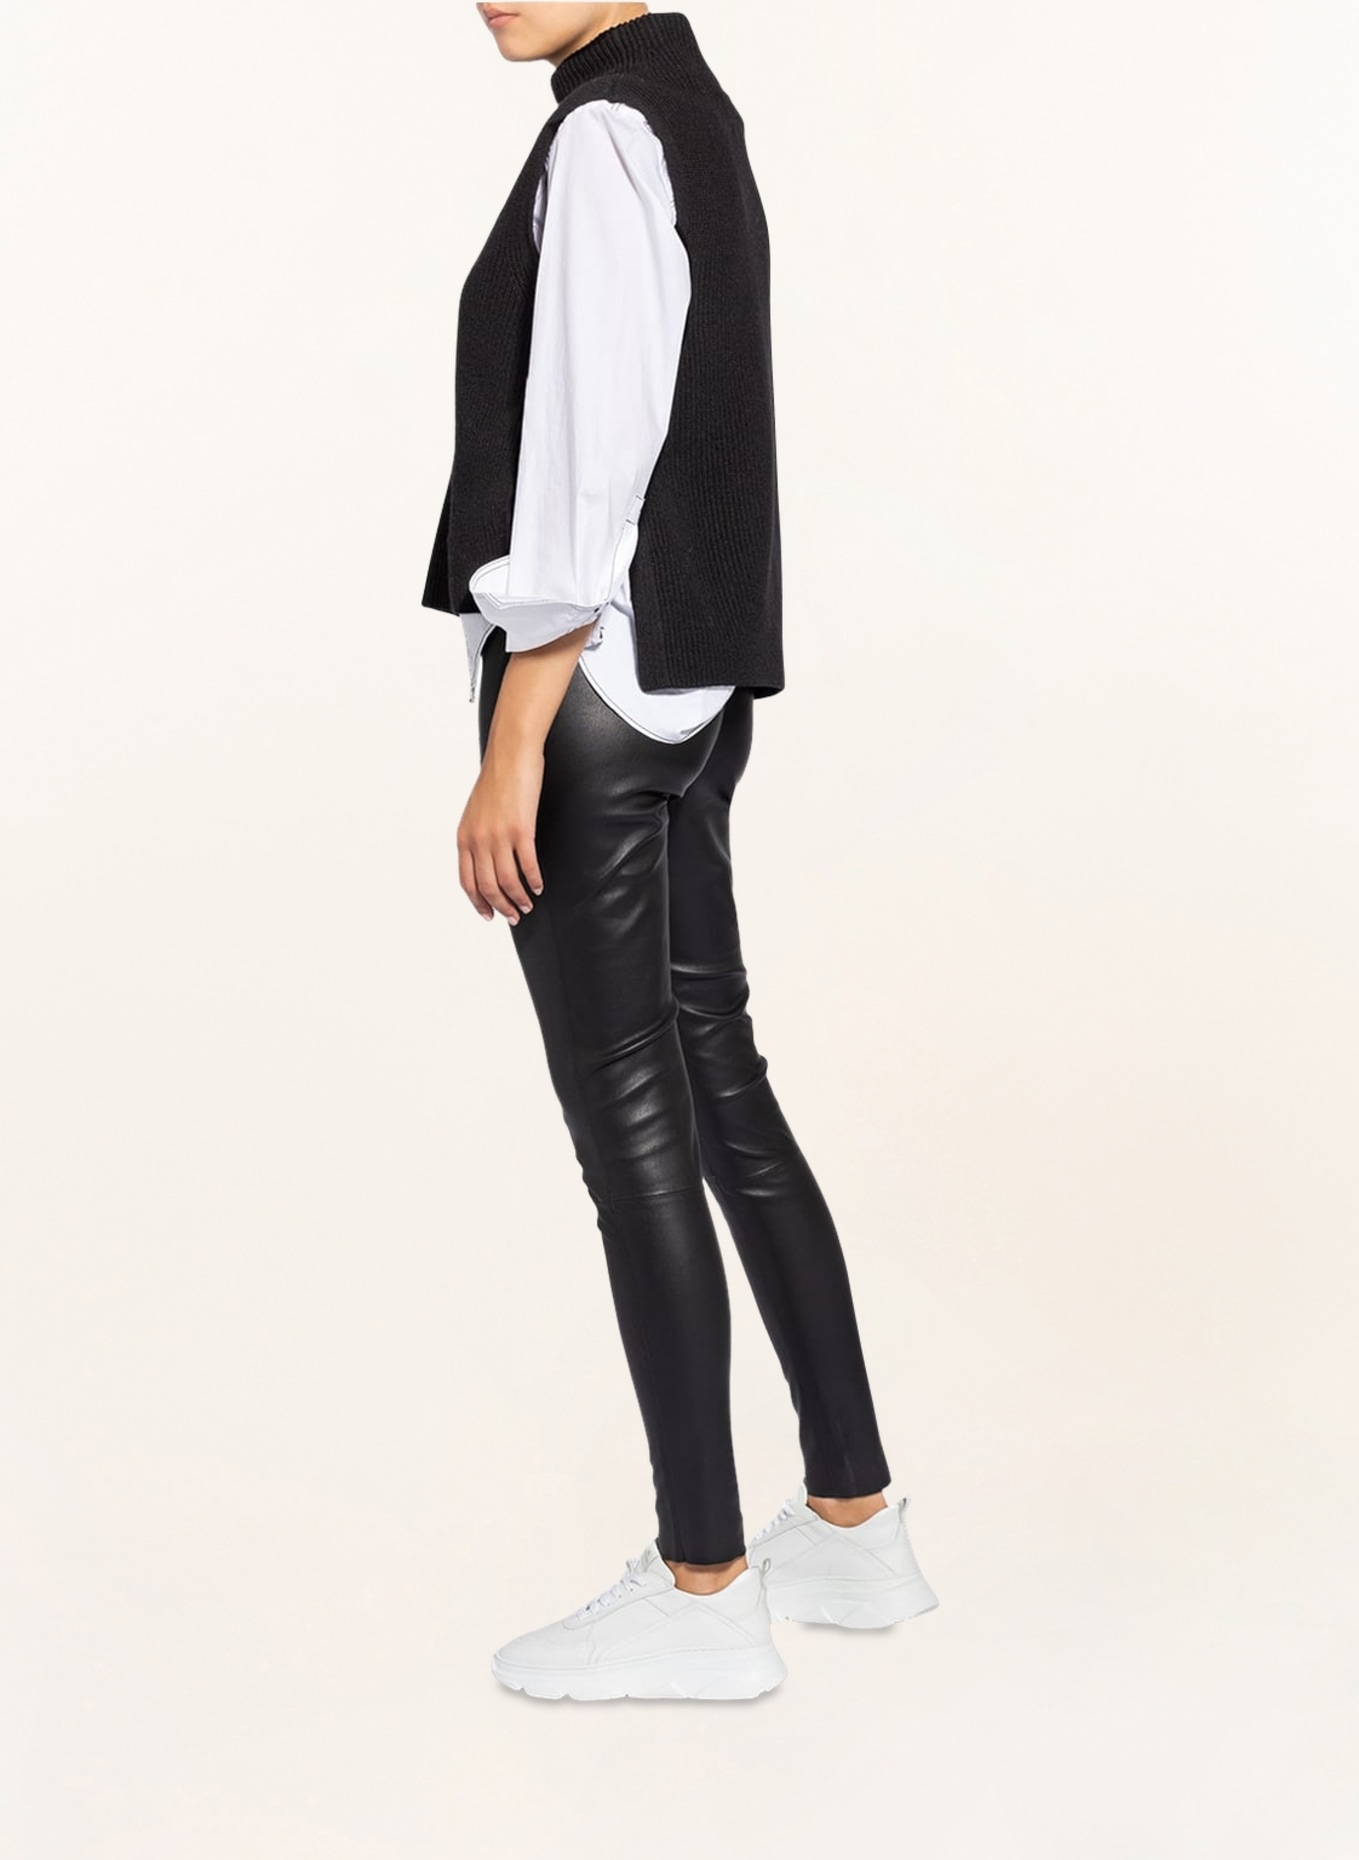 Maze Leather pants in black